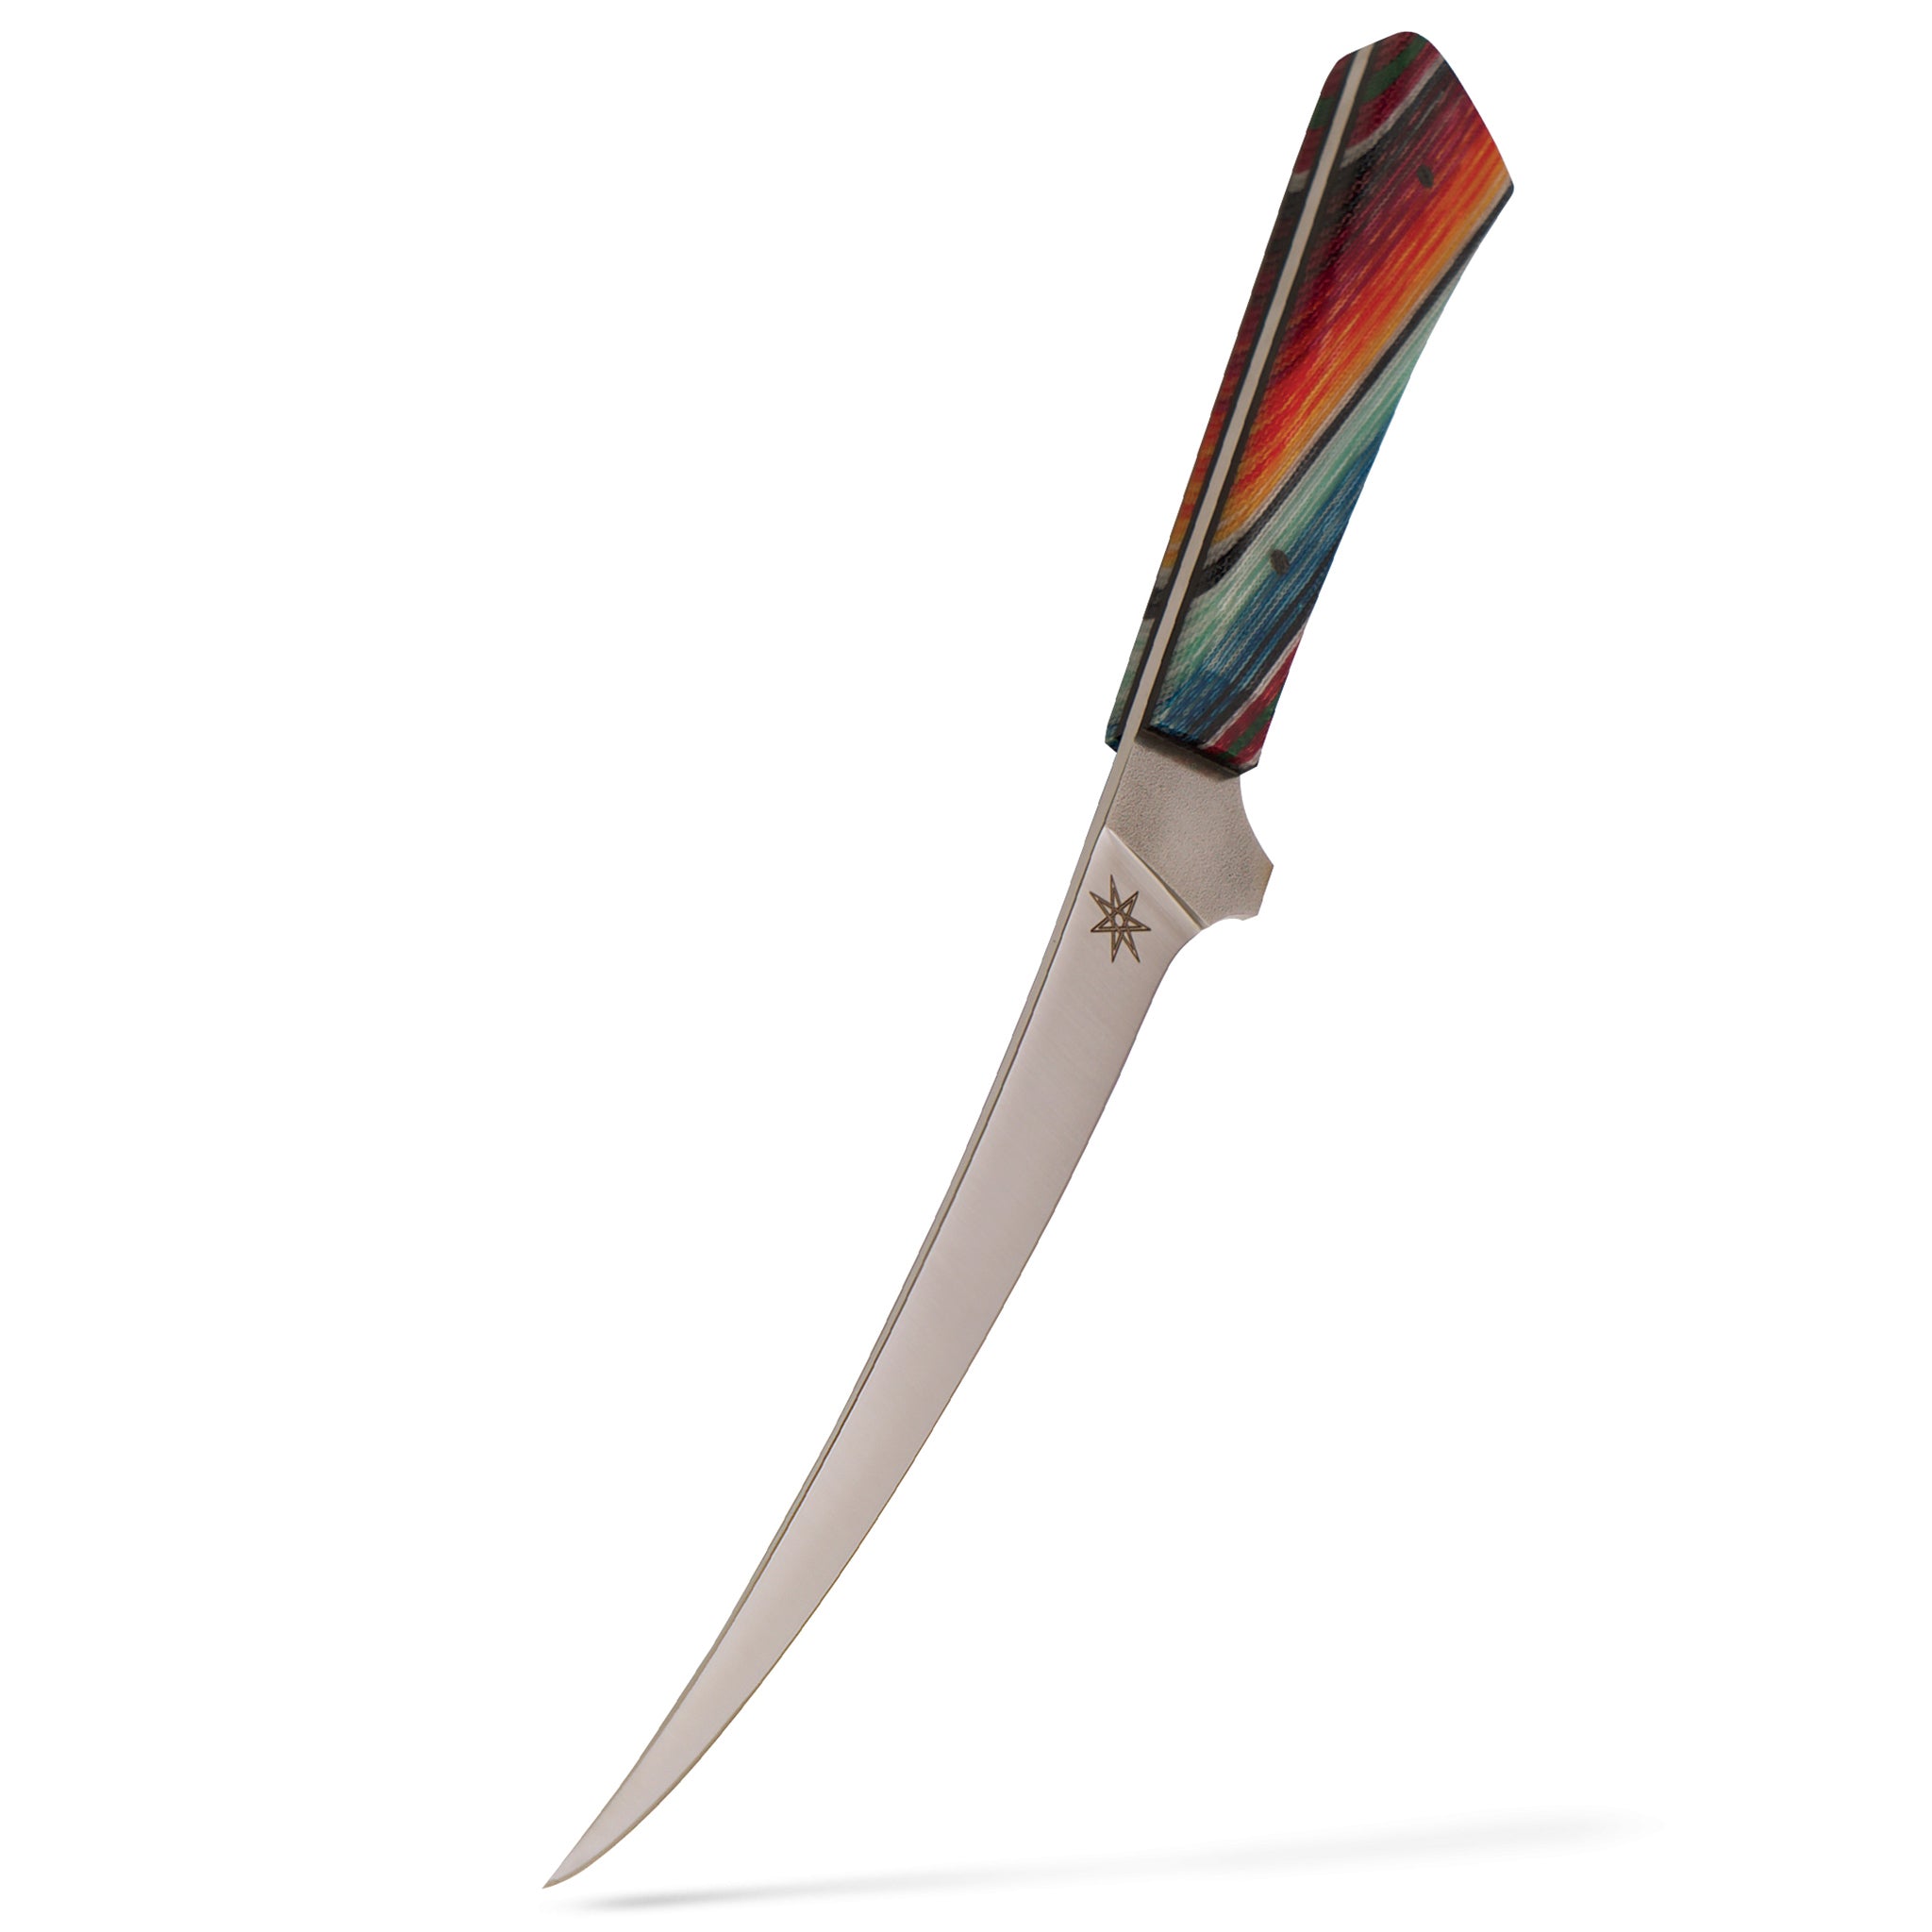 6" Curved Boning knife with stainless steel blade by Town Cutler featuring the colorful Baja “Mexican Blanket Especial” handle. Handmade in Reno, NV USA